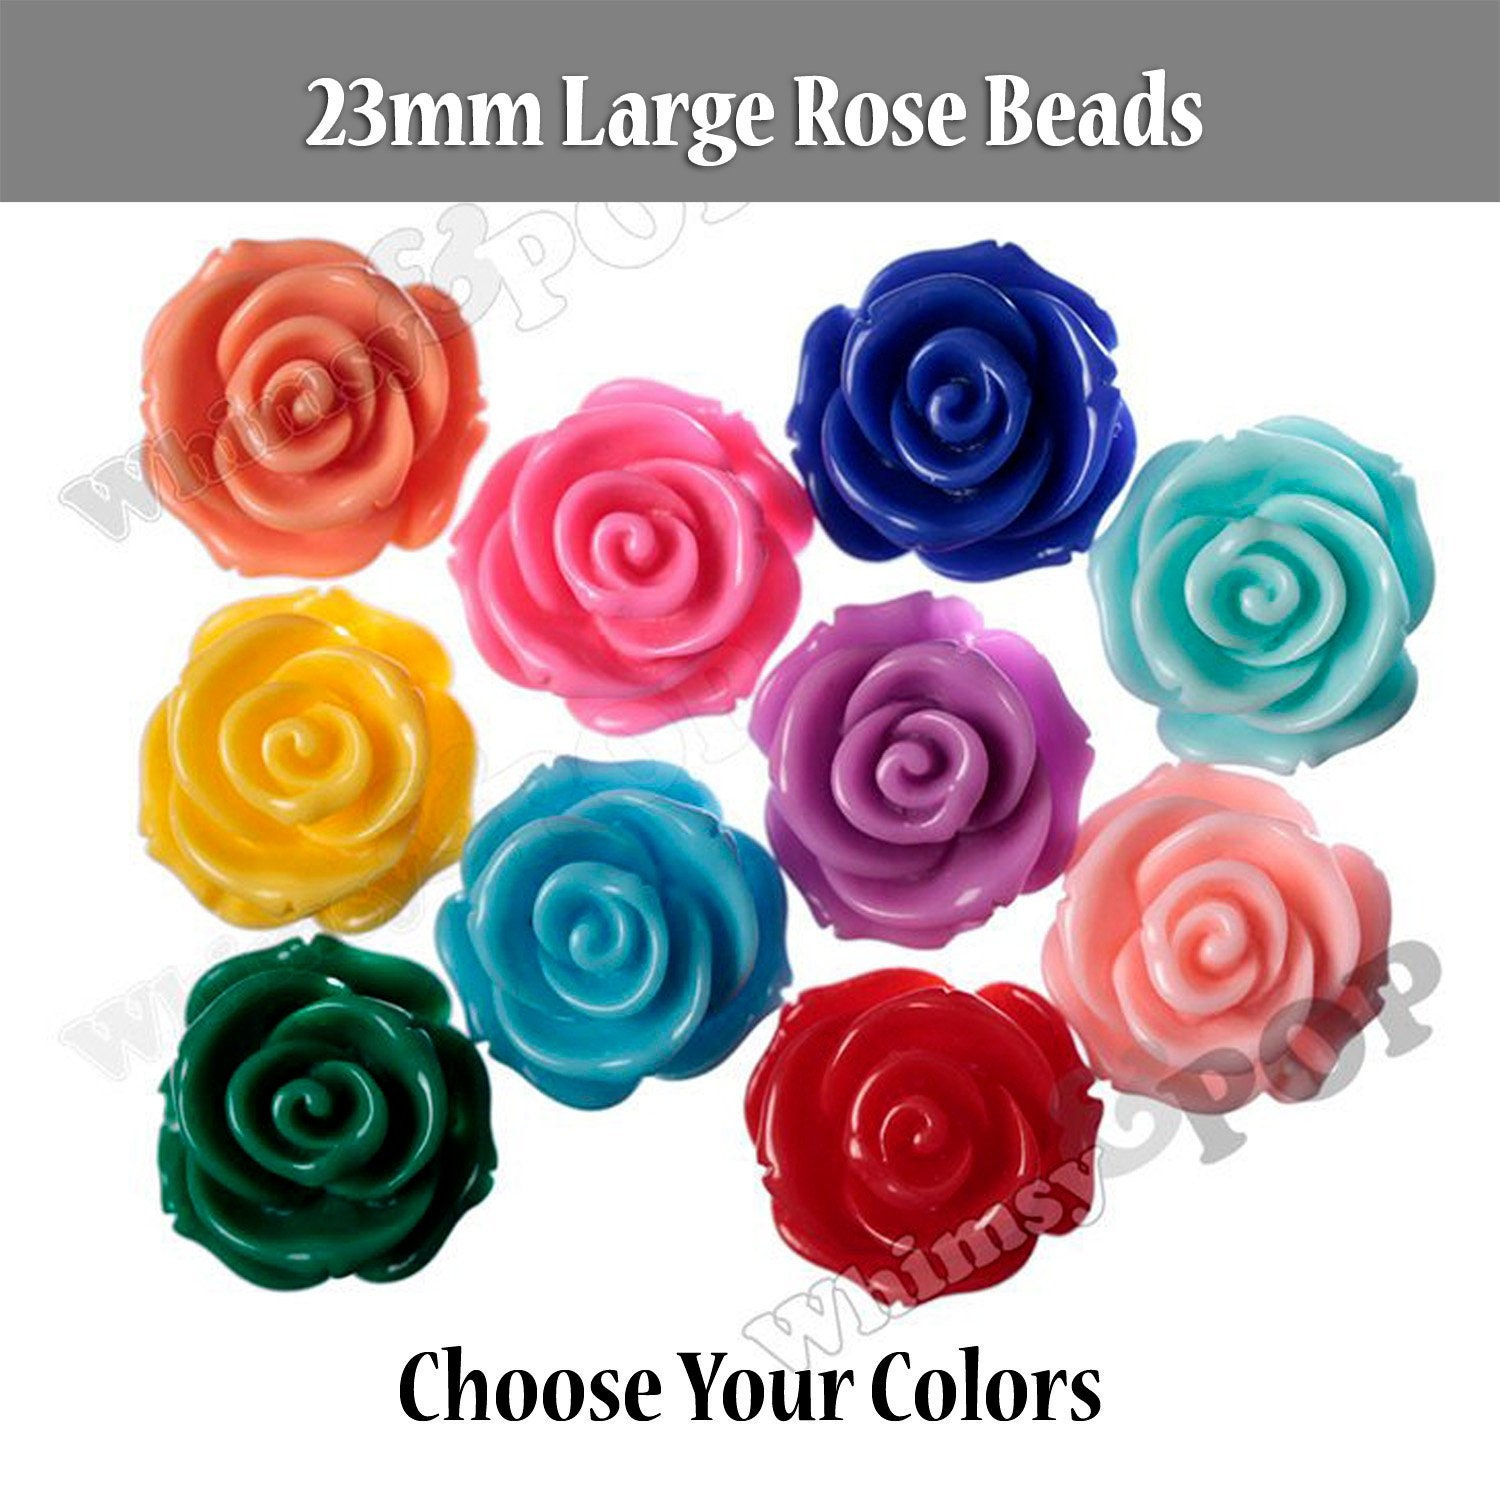 10mm flower shaped beads, polymer clay beads, rainbow beads, jewelry beads  bracelet beads, beads for kids approximately 40 beads